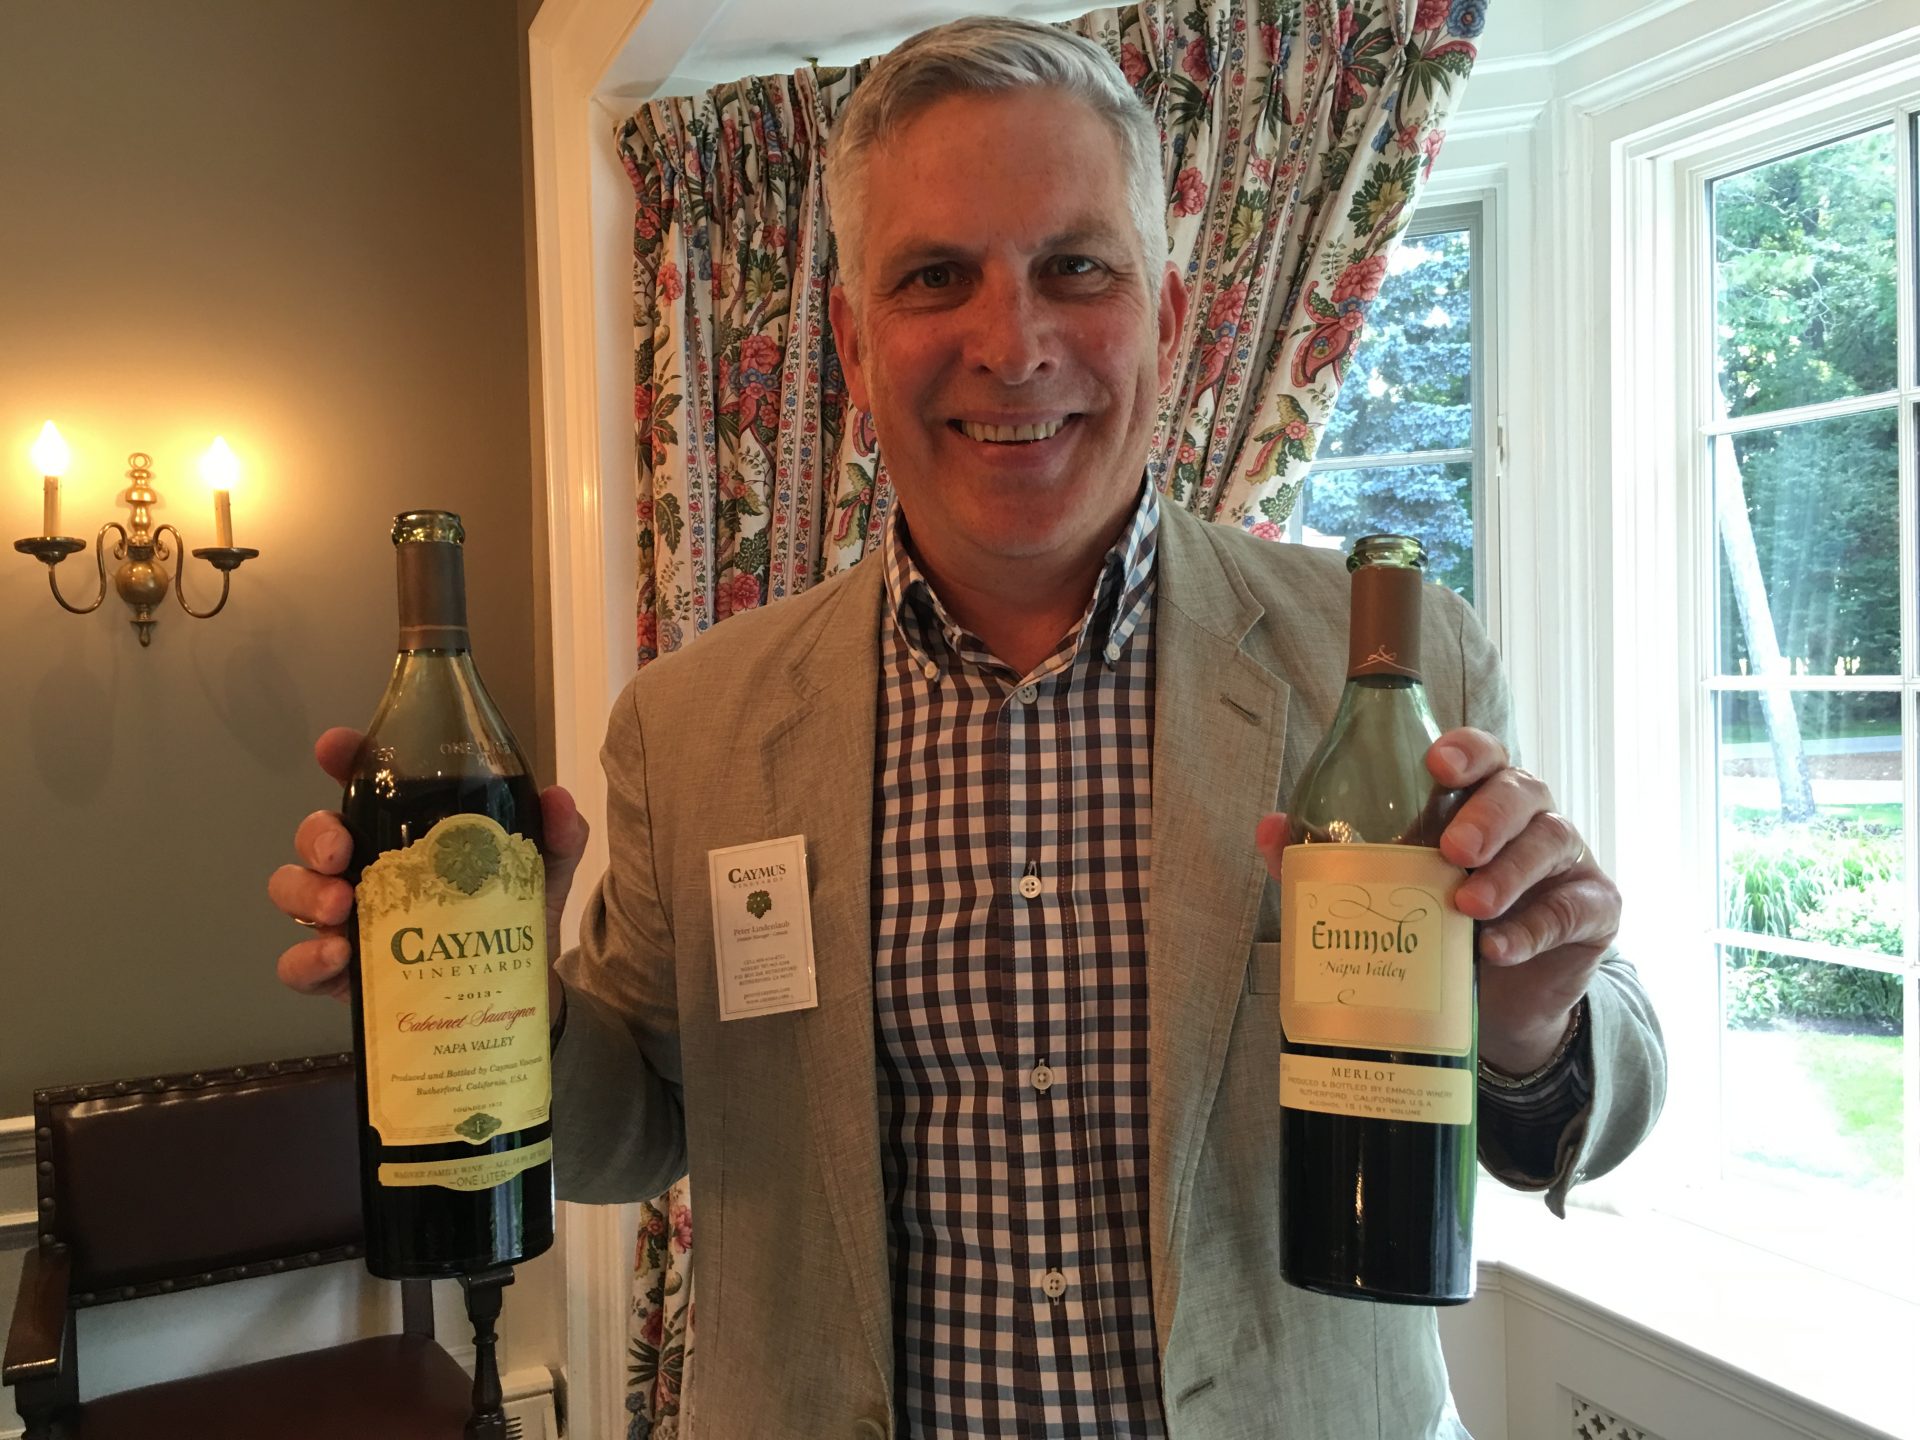 Wagner – Napa Valley’s Esteemed Family of Winemakers